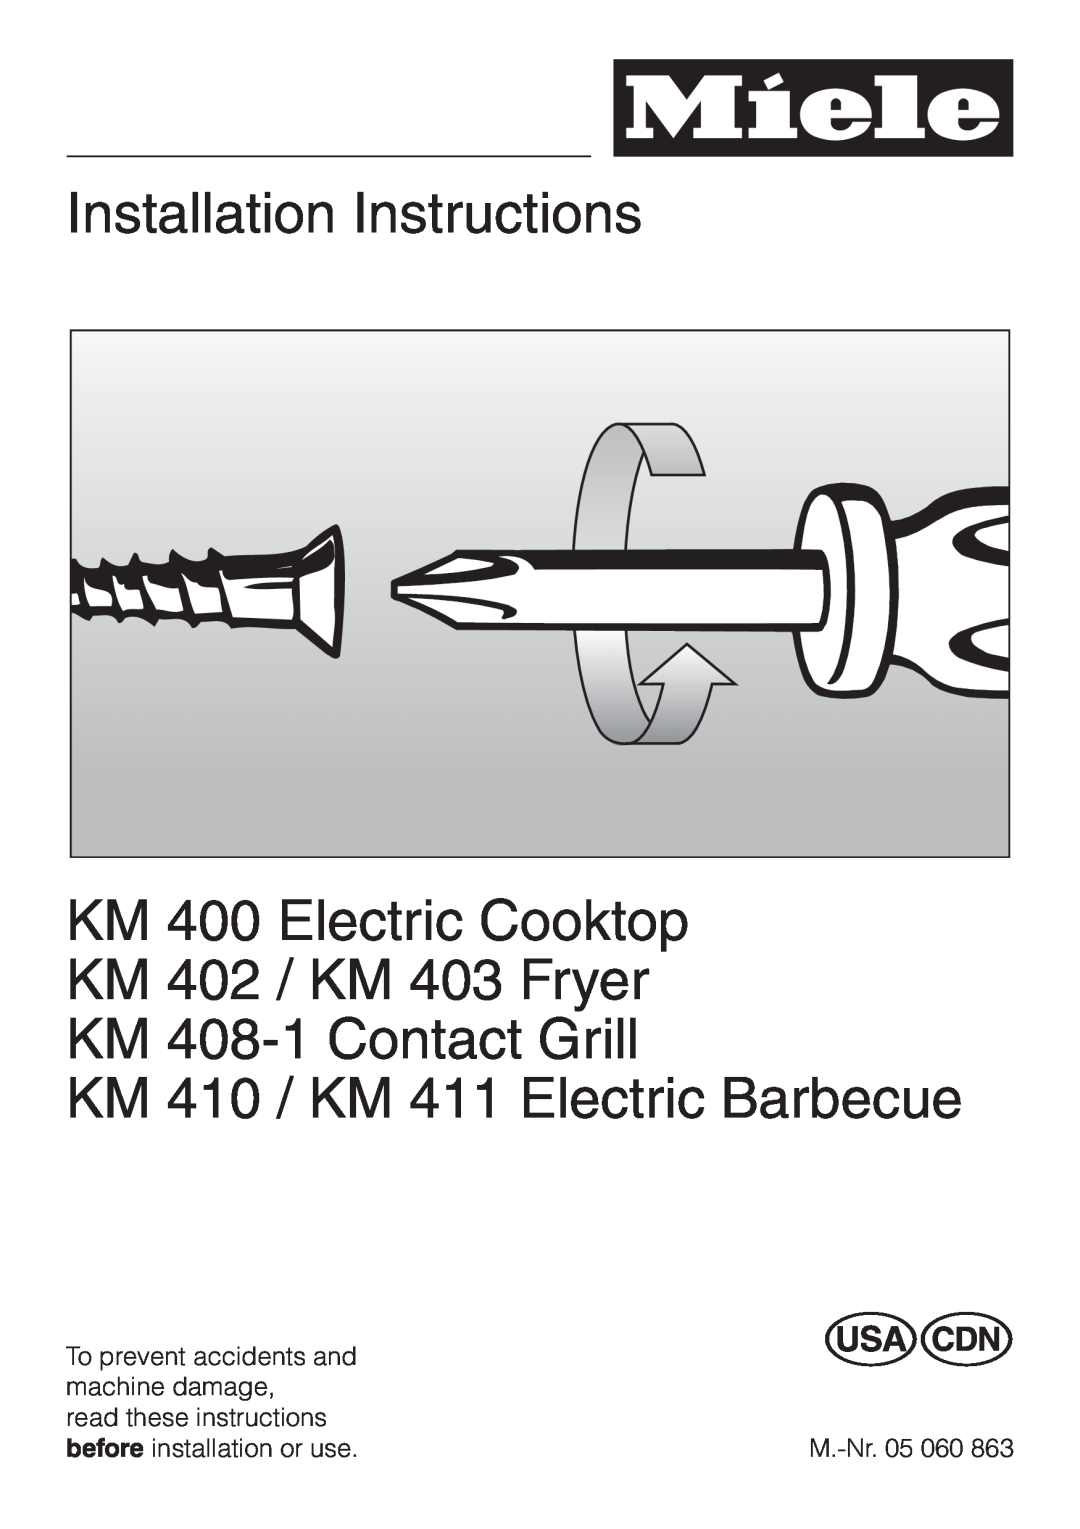 Miele KM410 installation instructions Installation Instructions KM 400 Electric Cooktop, KM 410 / KM 411 Electric Barbecue 